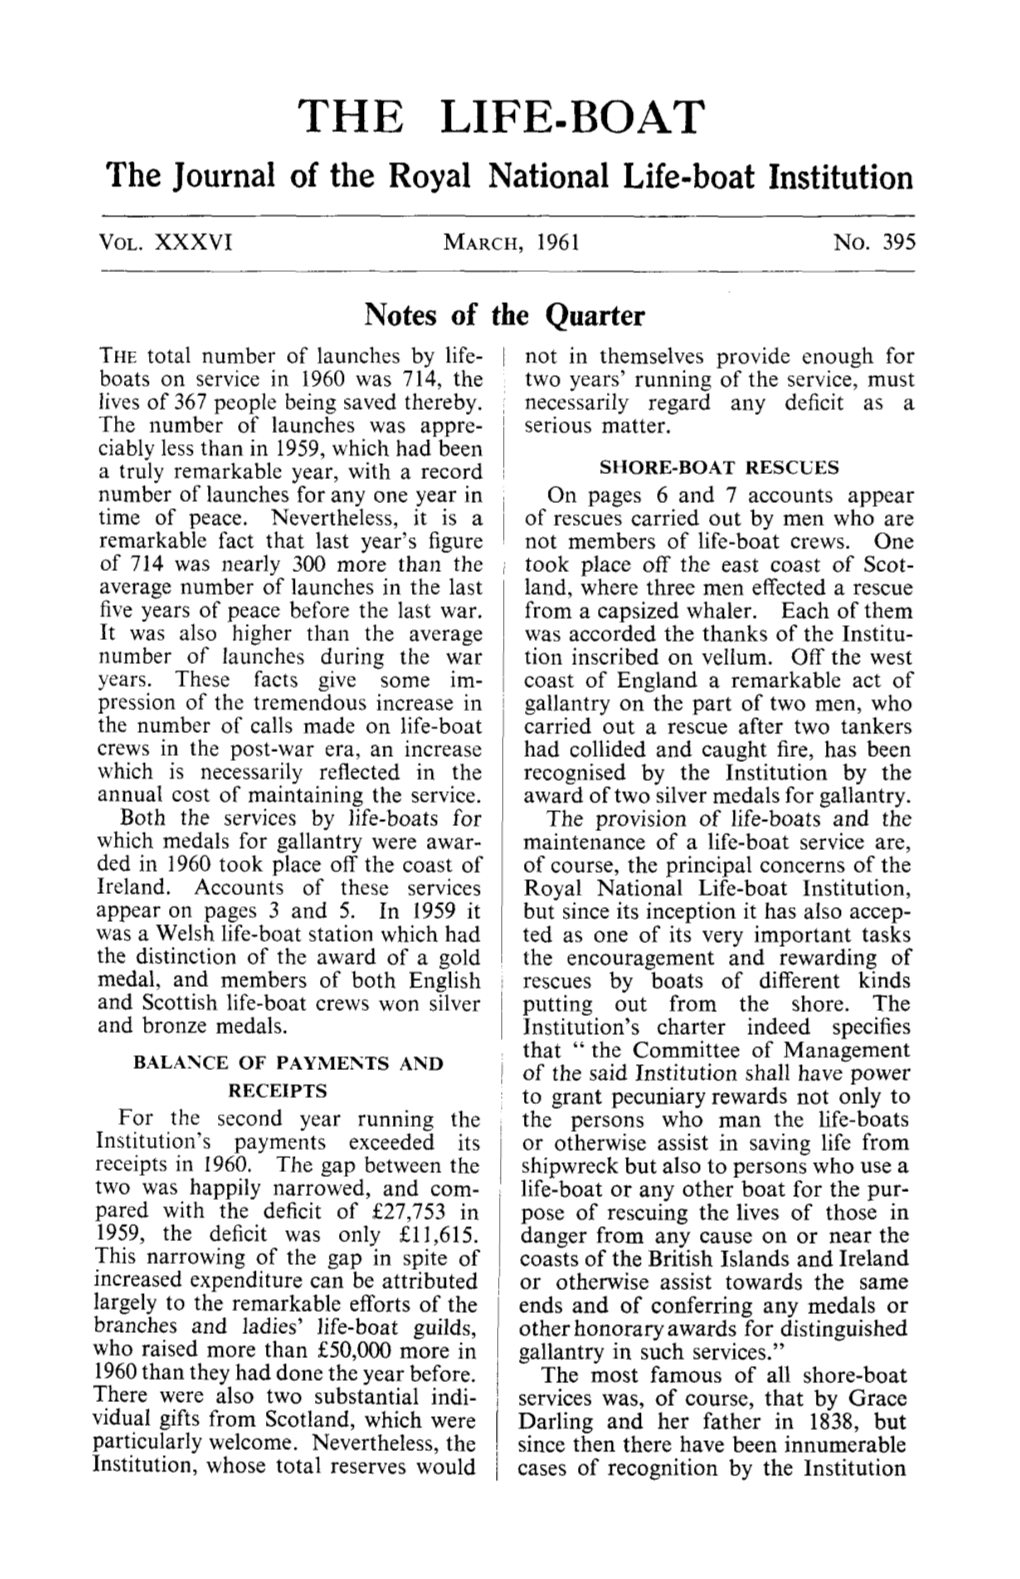 The Journal of the Royal National Life-Boat Institution